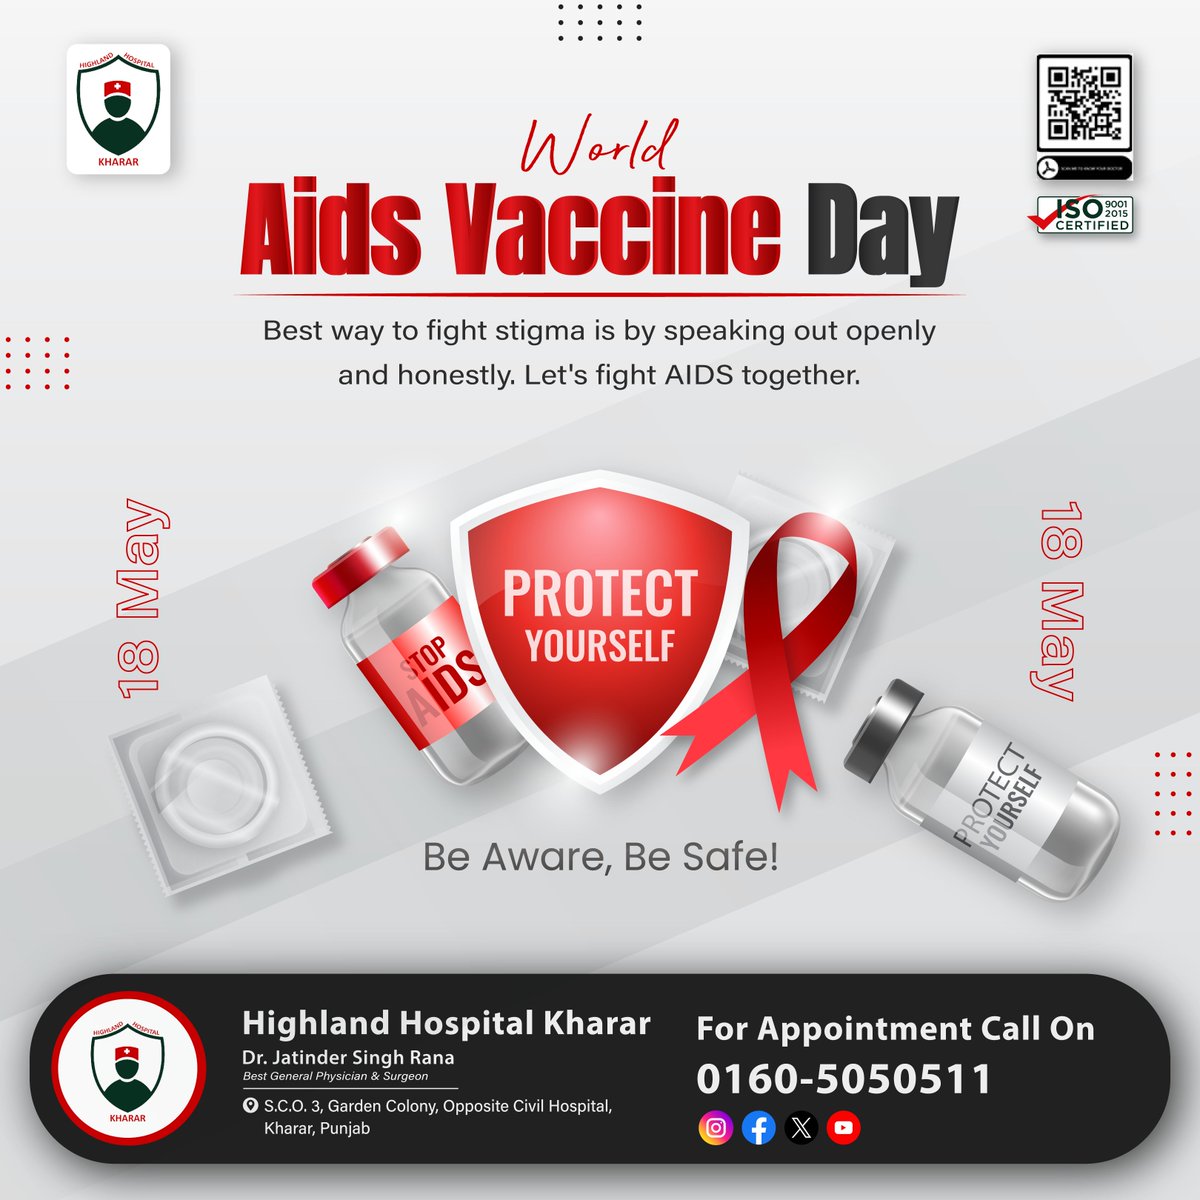 🌍 On this #WorldAIDSVaccineDay, let's unite in the fight against #HIV. At #HighlandHospitalKharar, we're committed to a future free from #AIDS. Together, we can make it possible!
.
#India #HIV #HIVAIDS #HSV #Aidsawareness #Kharar #Mohali #DrJatinderSingh #Besthospital